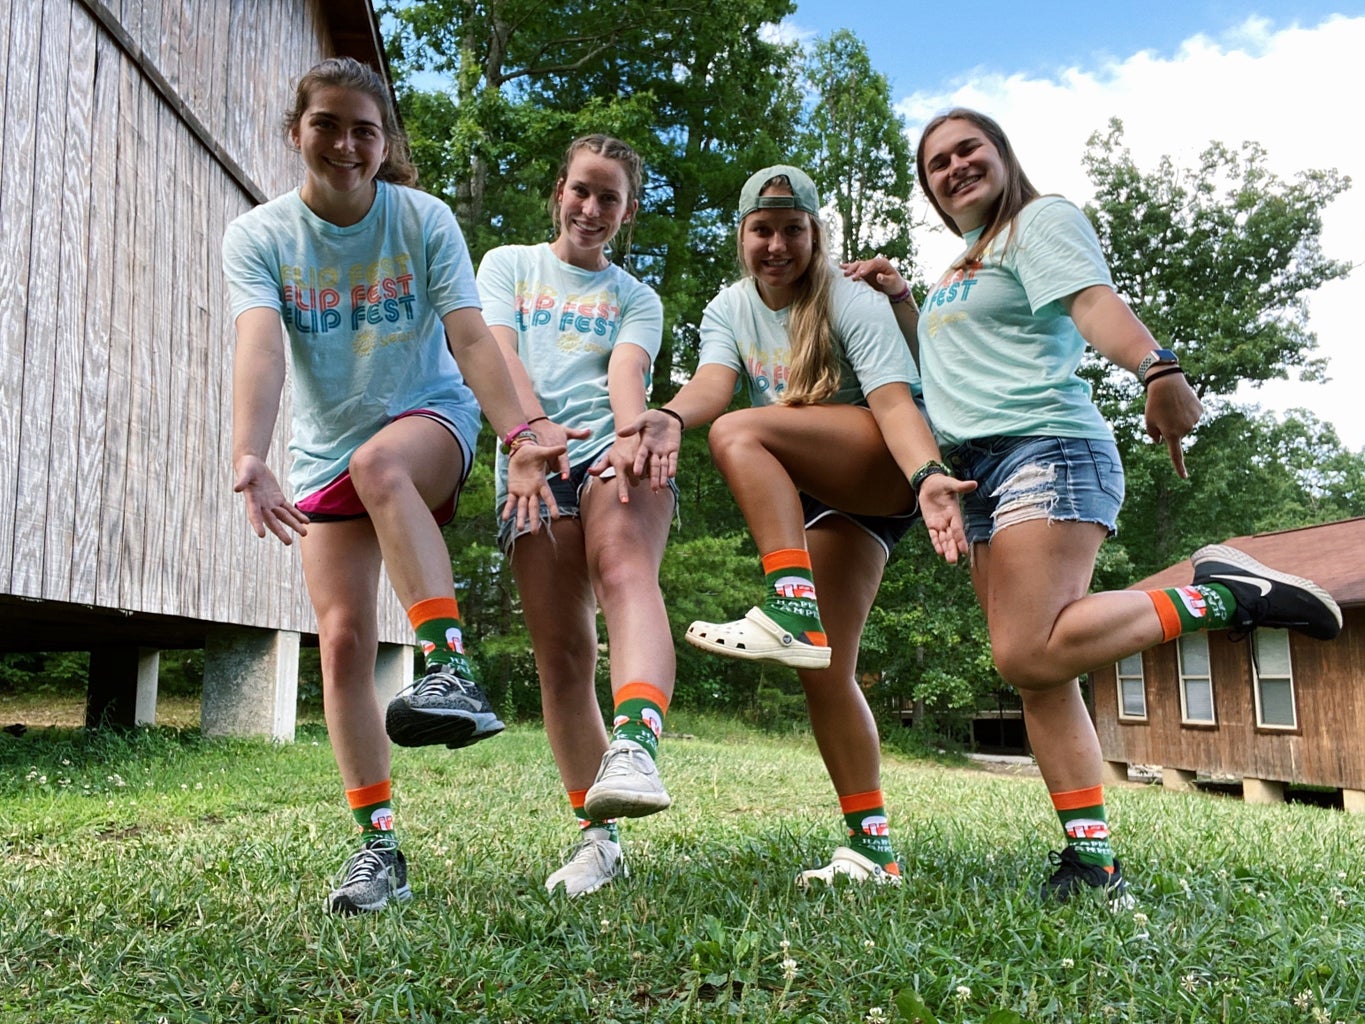 my camp friends and I with matching socks